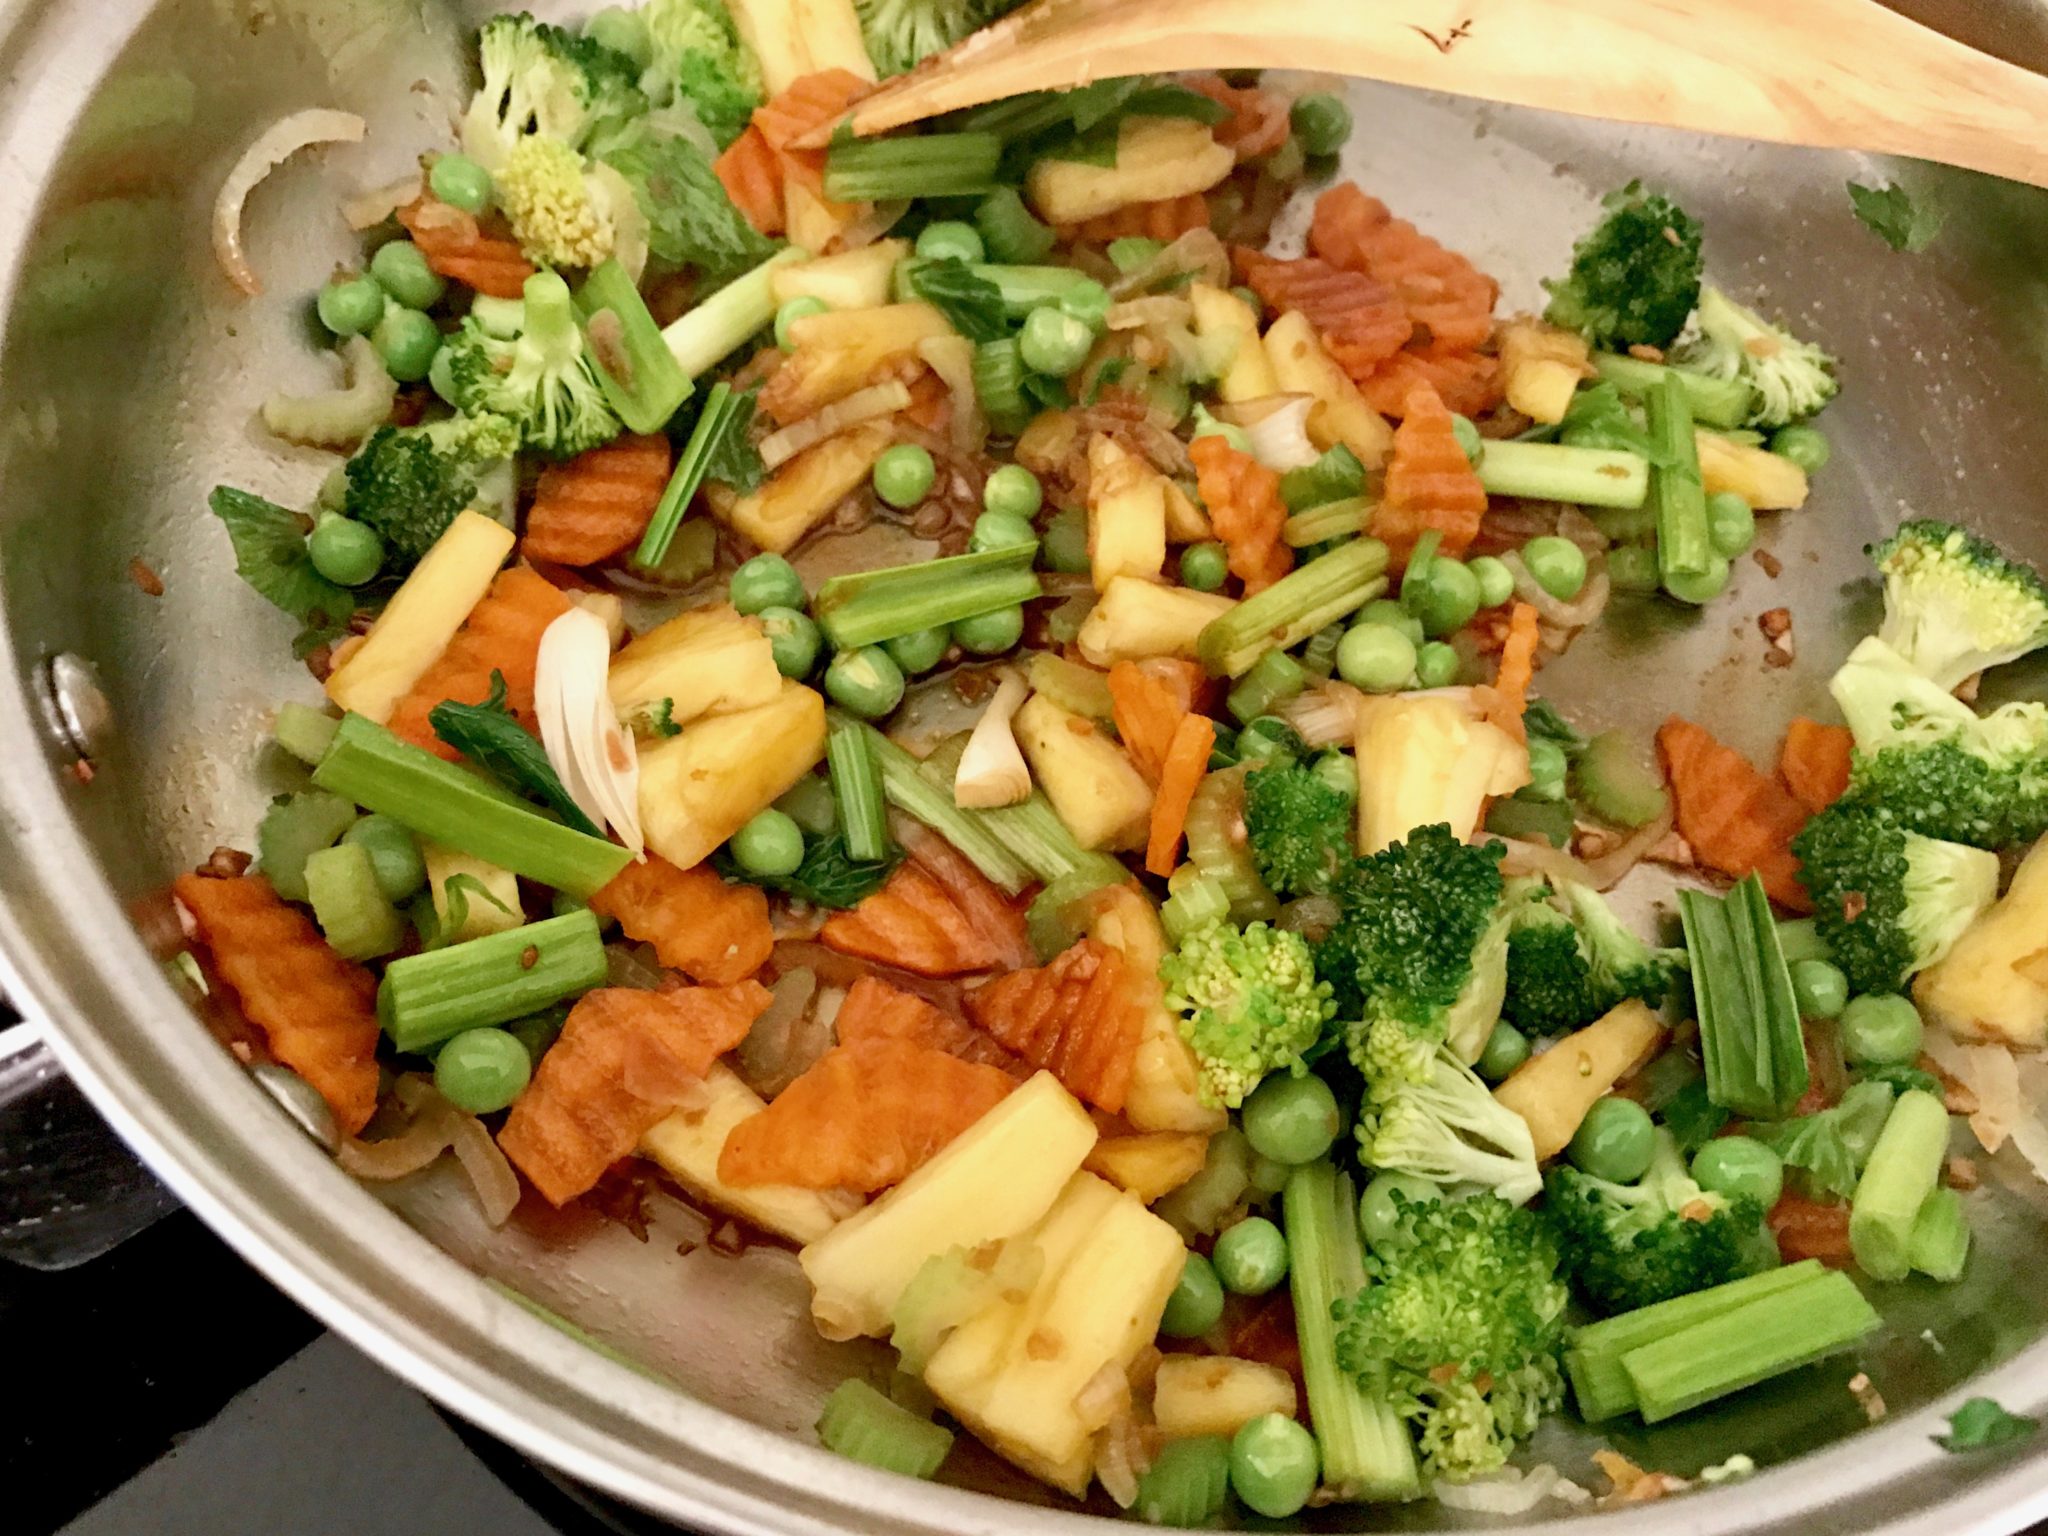 frying all the vegetables together